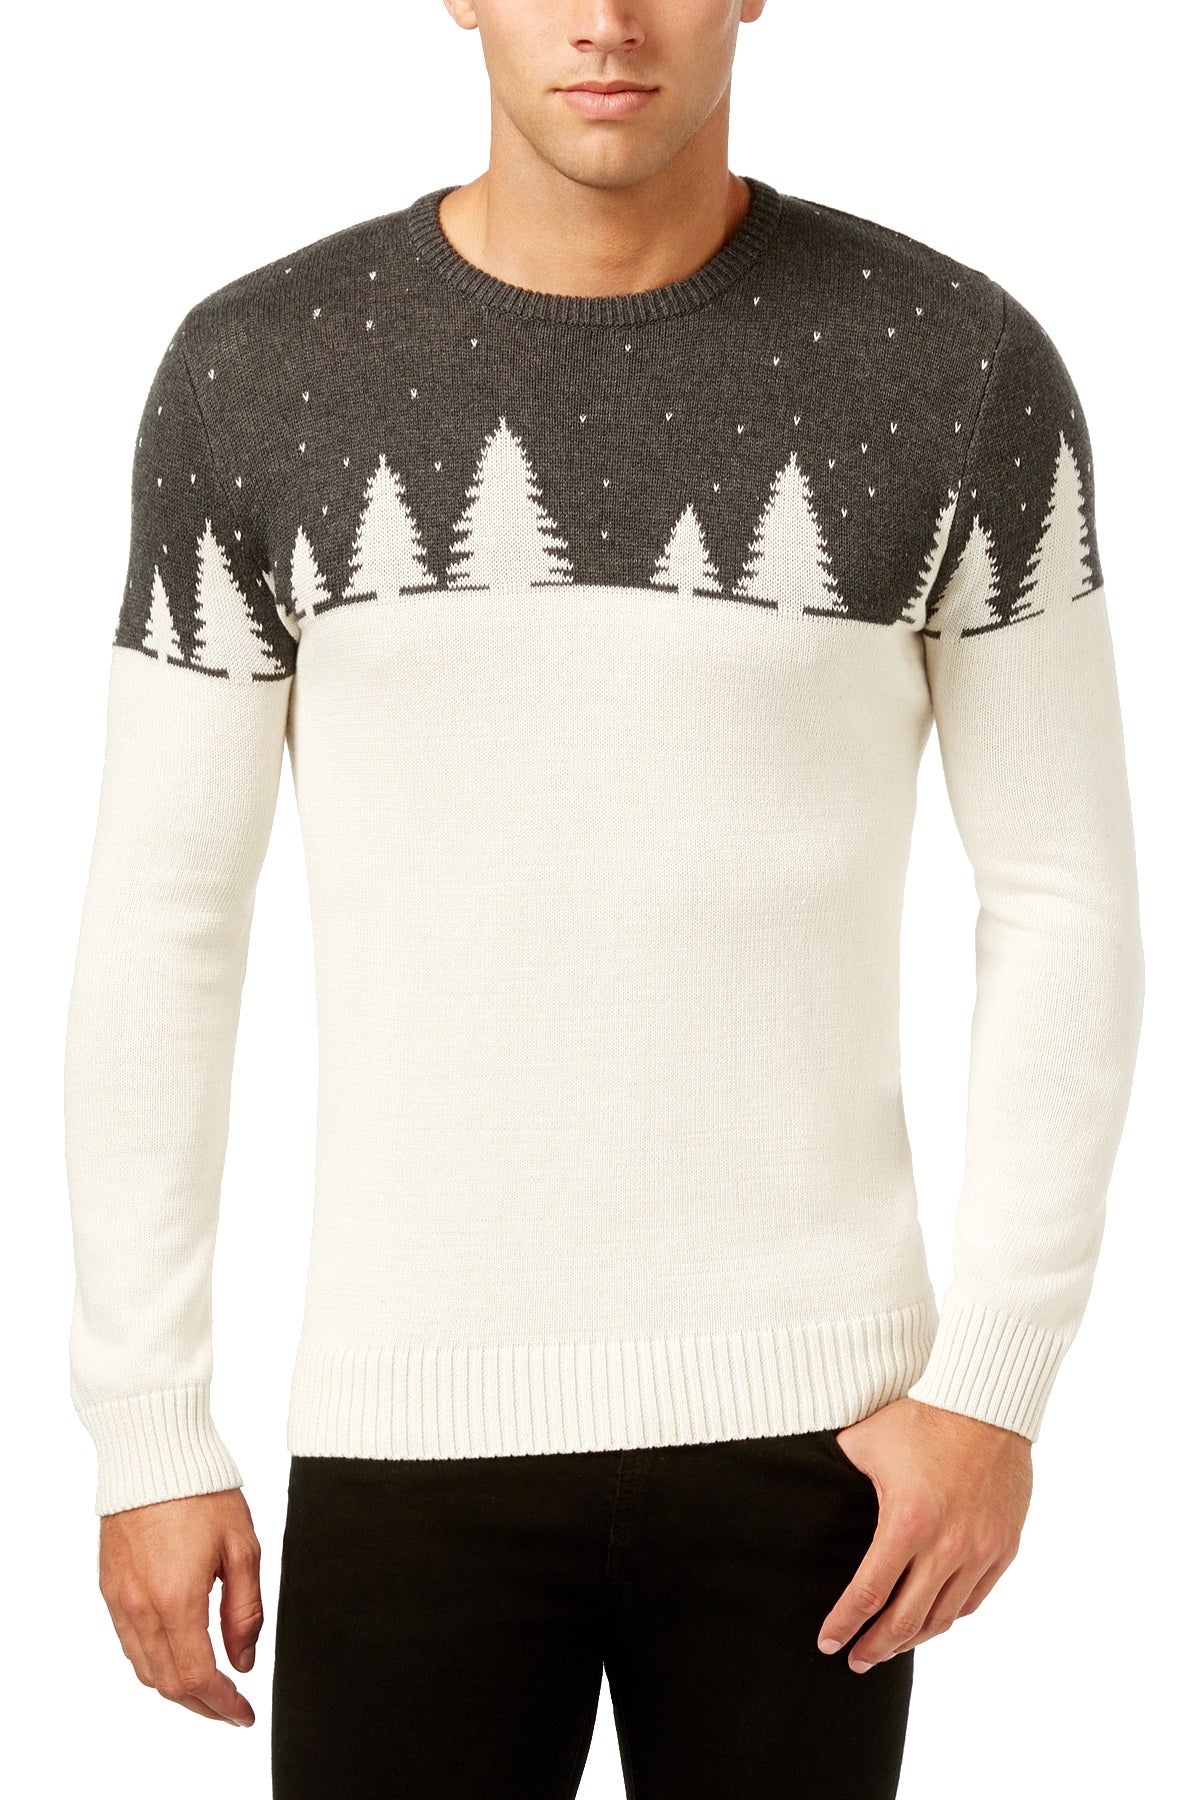 Holiday Arcade Charcoal-Heather Knit Color-Blocked Pullover Sweater